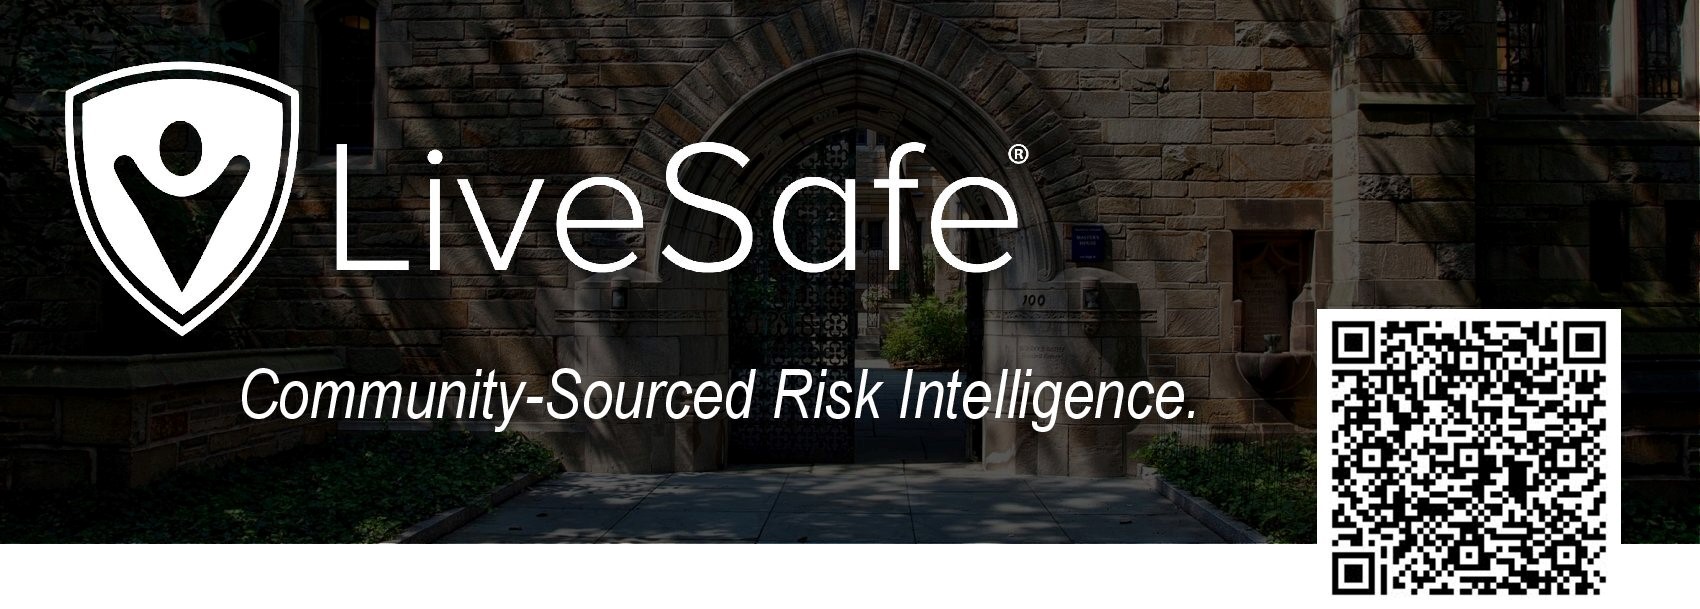 LiveSafe: Community-Sourced Risk Intelligence graphic with a QR code to download the LiveSafe app on an Apple or Android device